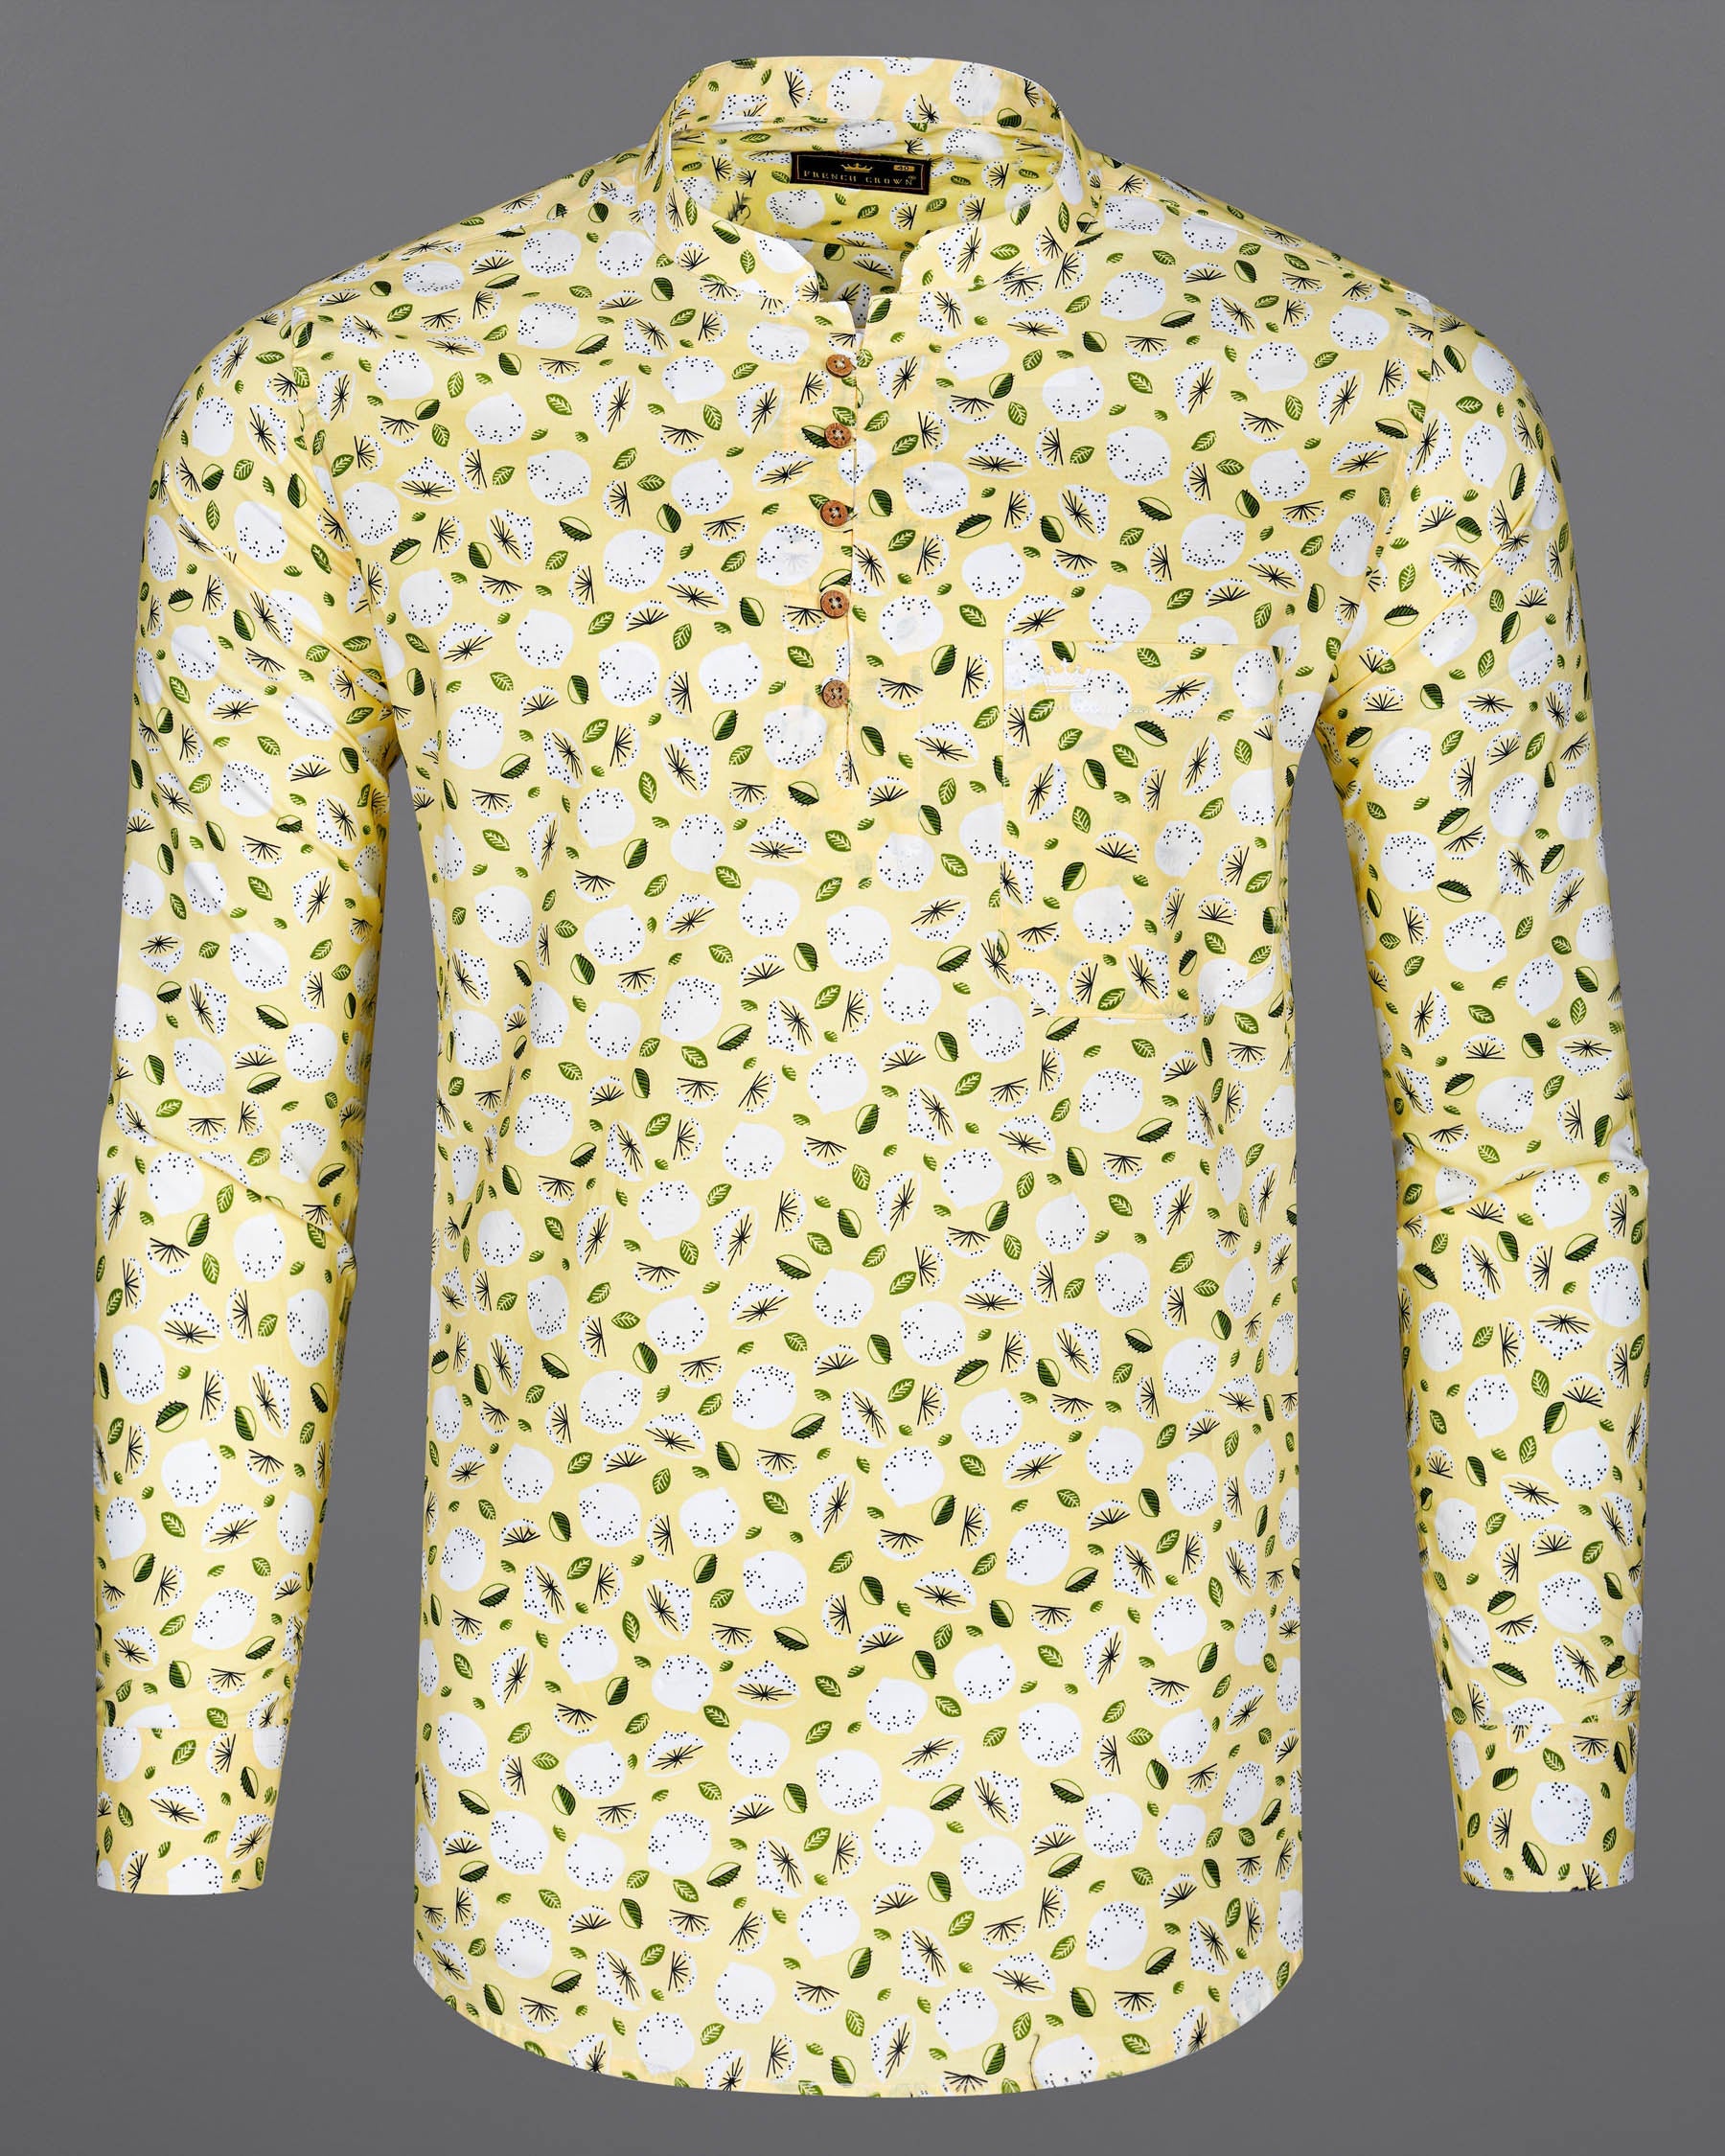 Pale Goldenrod Yellow Floral Printed Premium Cotton Kurta Shirt 7979-KS-38,7979-KS-H-38,7979-KS-39,7979-KS-H-39,7979-KS-40,7979-KS-H-40,7979-KS-42,7979-KS-H-42,7979-KS-44,7979-KS-H-44,7979-KS-46,7979-KS-H-46,7979-KS-48,7979-KS-H-48,7979-KS-50,7979-KS-H-50,7979-KS-52,7979-KS-H-52